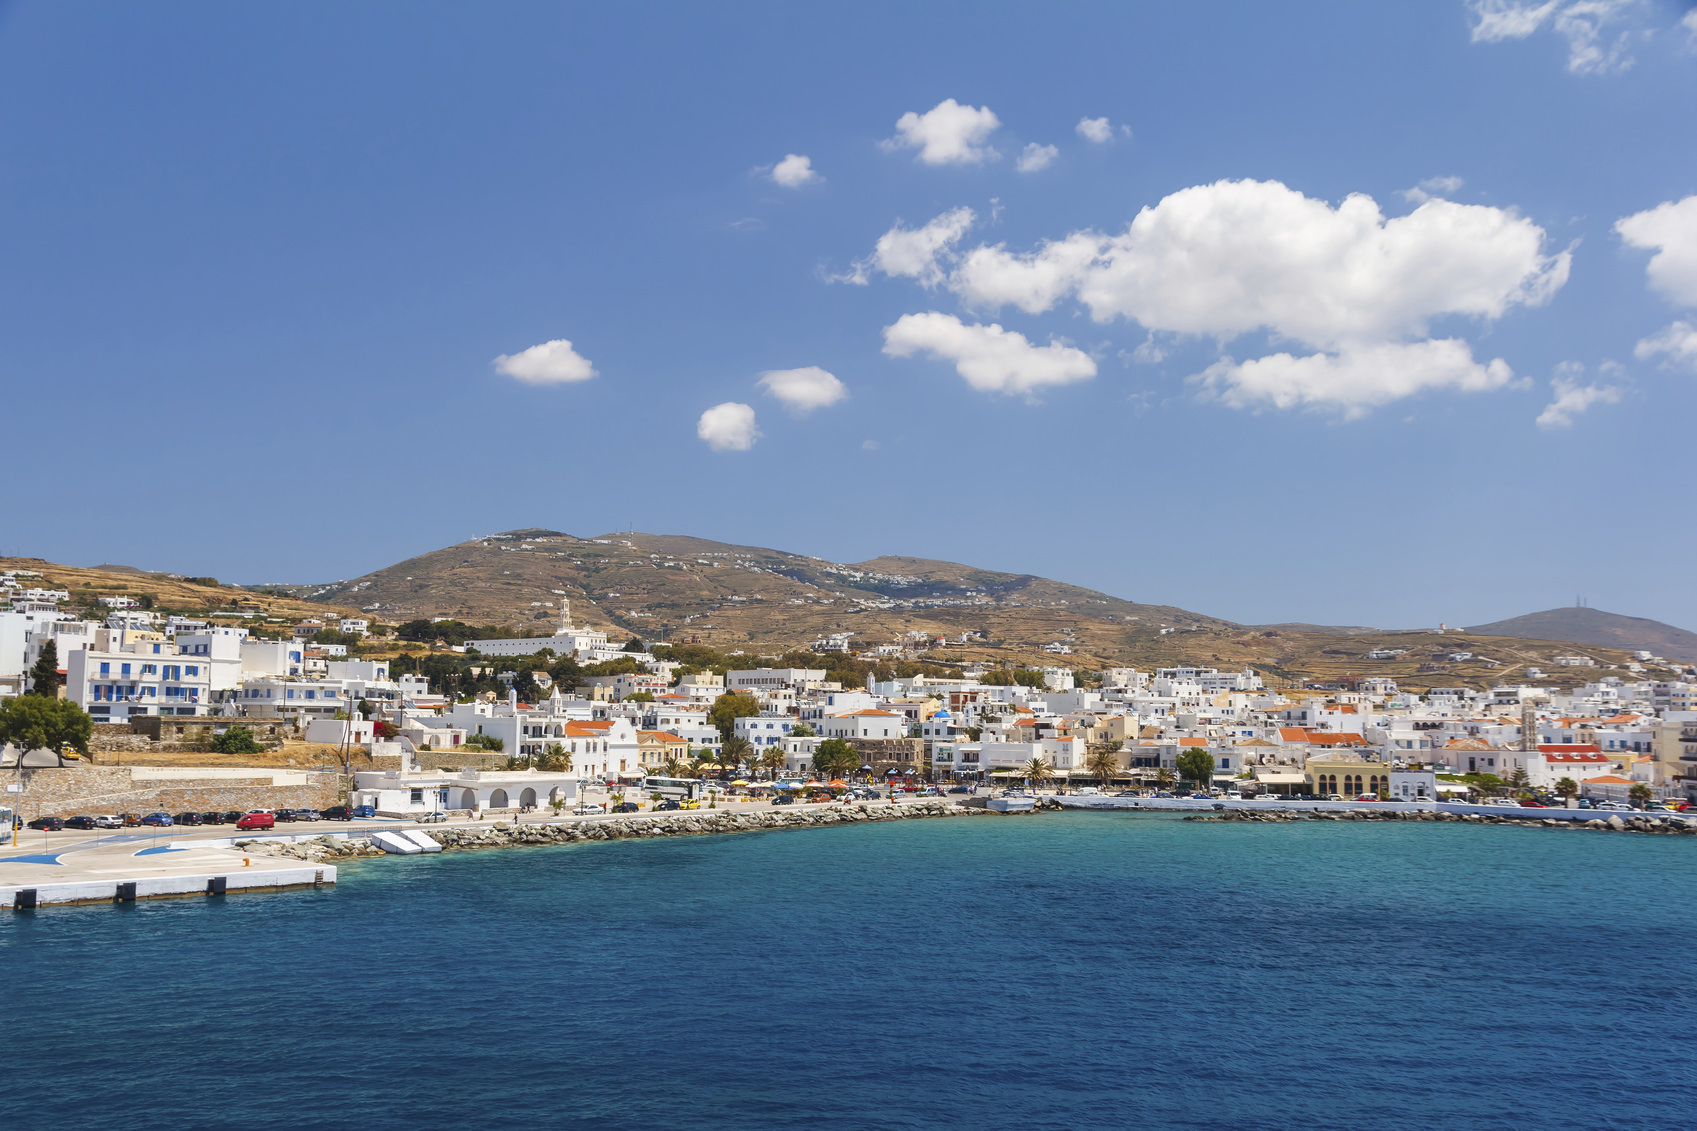 Tinos city and harbor in Cyclades against a blue sky, Greece